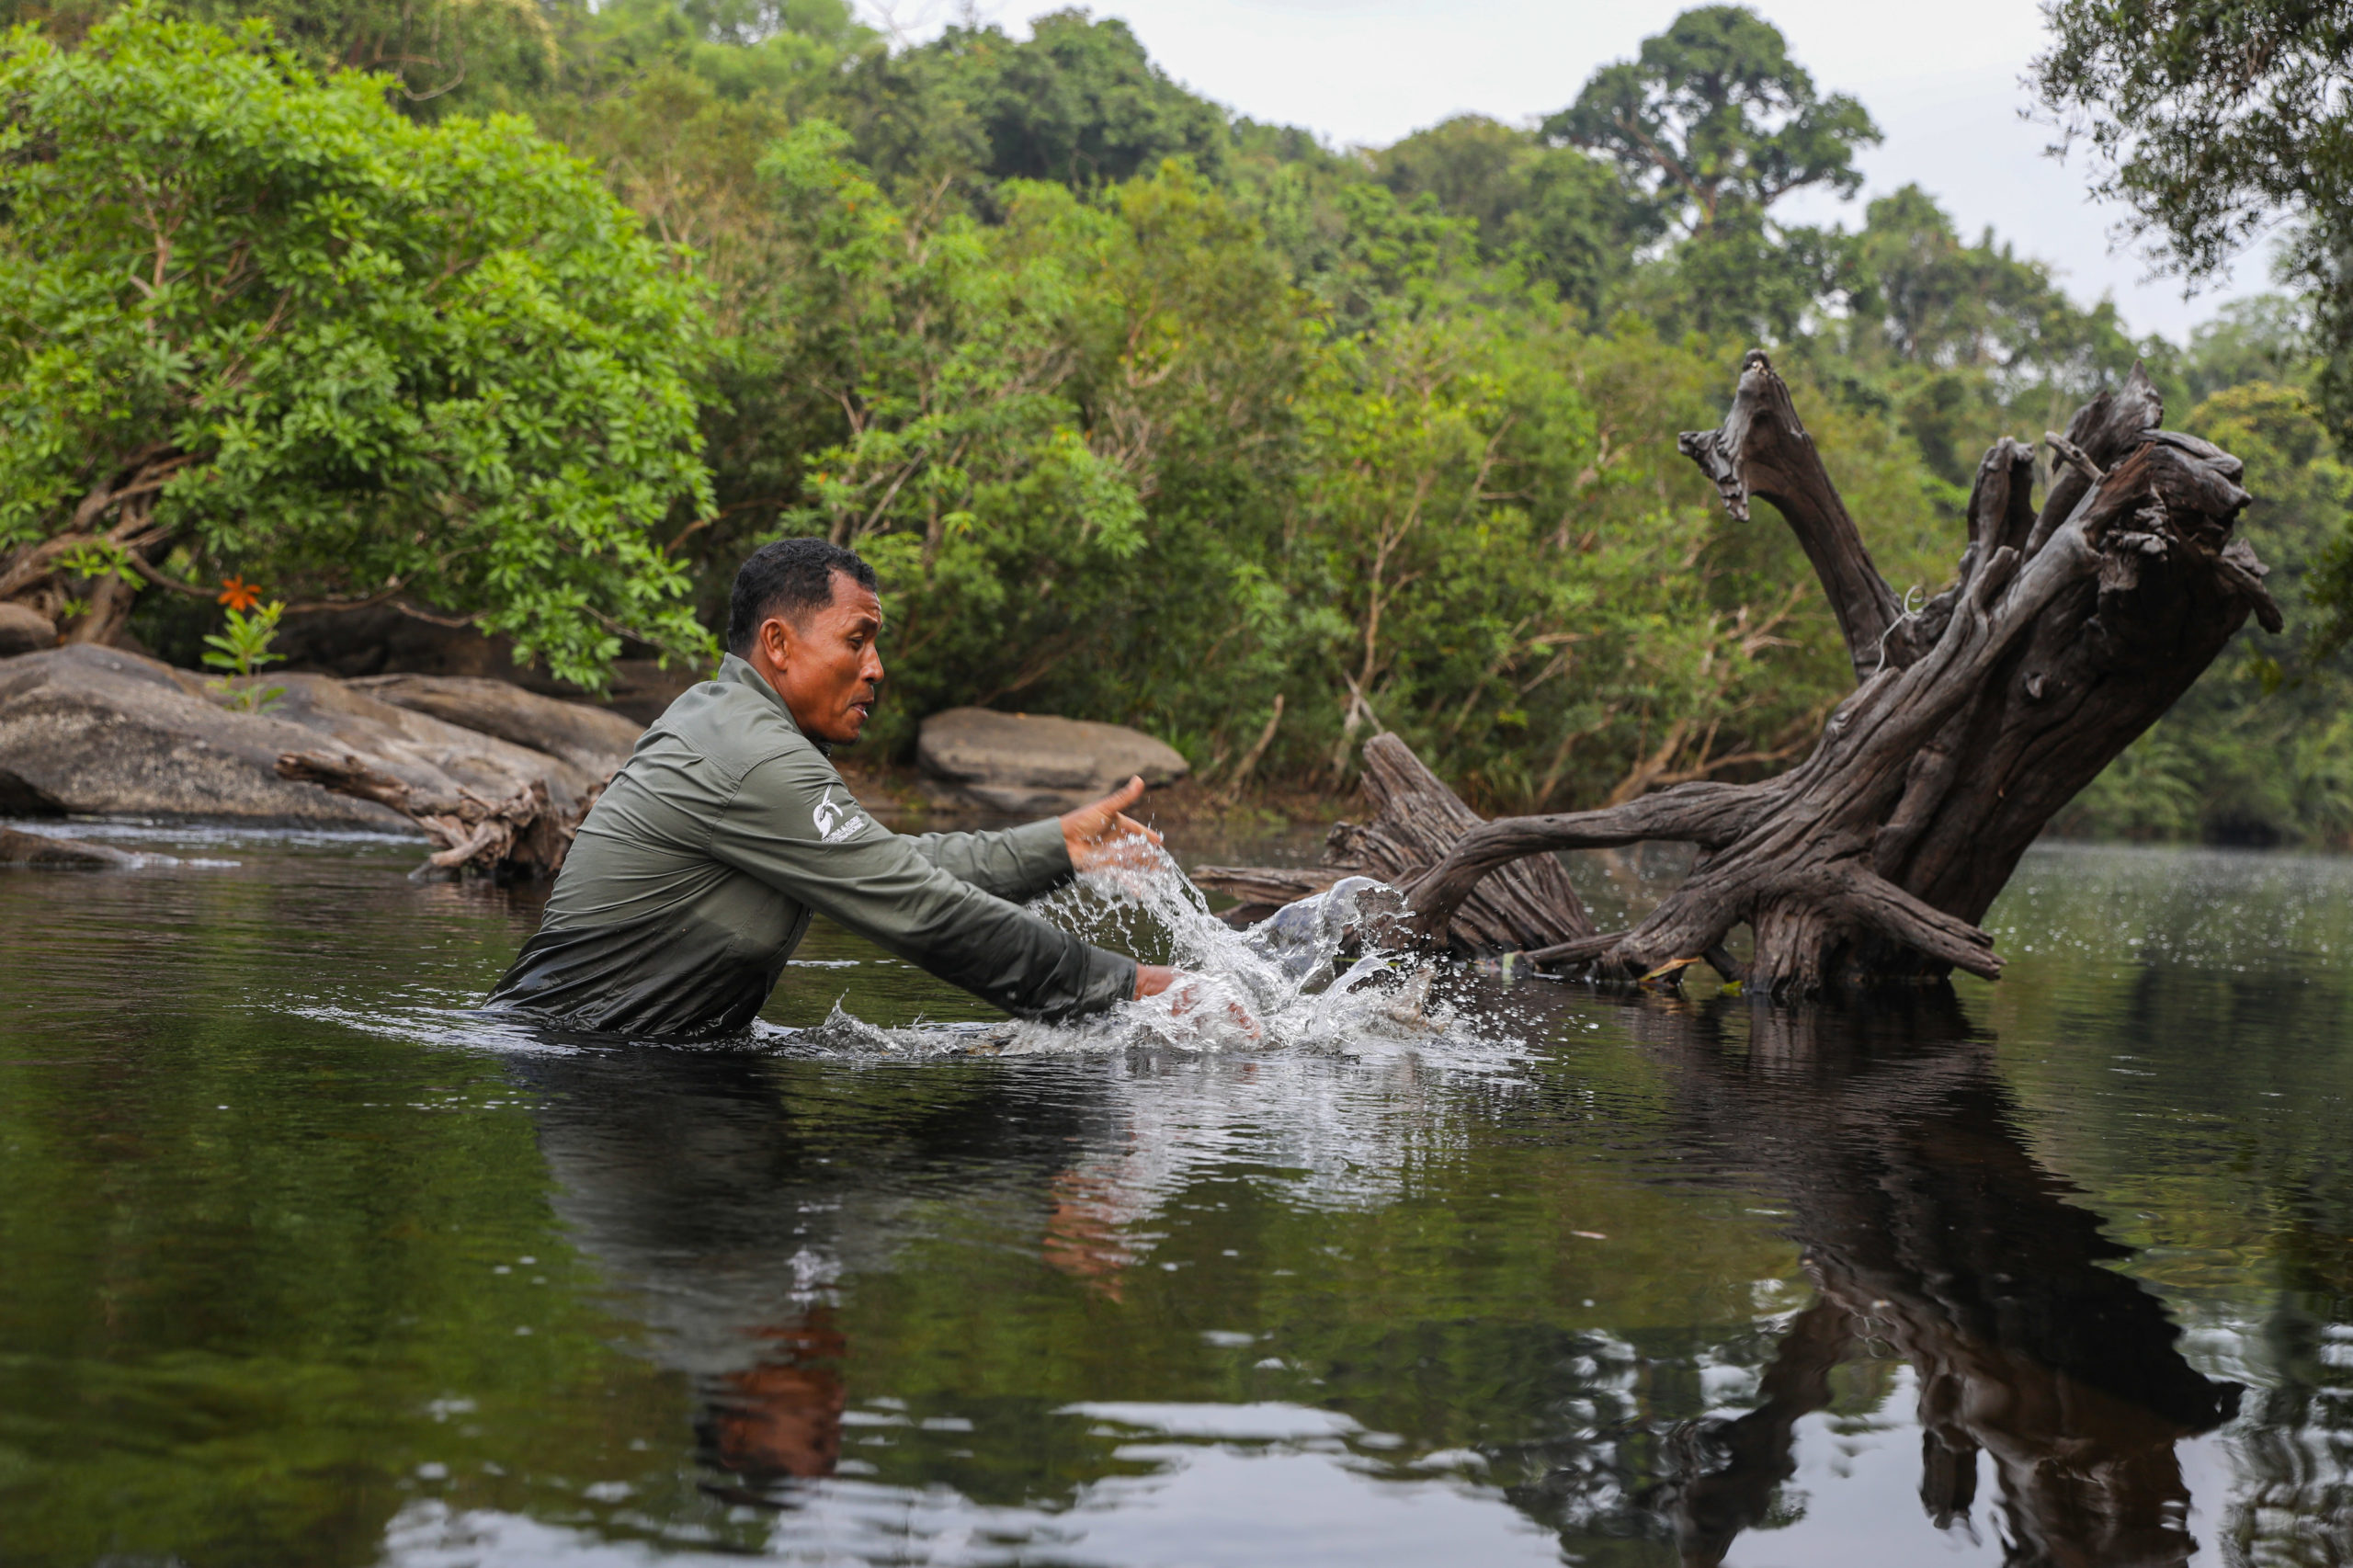 Sim Khmao, leader of a patrol team of community wardens tasked with protecting crocodile sanctuaries in the Cardamom Mountains, releases a farm-donated, pure-bred Siamese crocodile into the Sre Ambel River that flows through Cambodia’s Southern Cardamom National Park